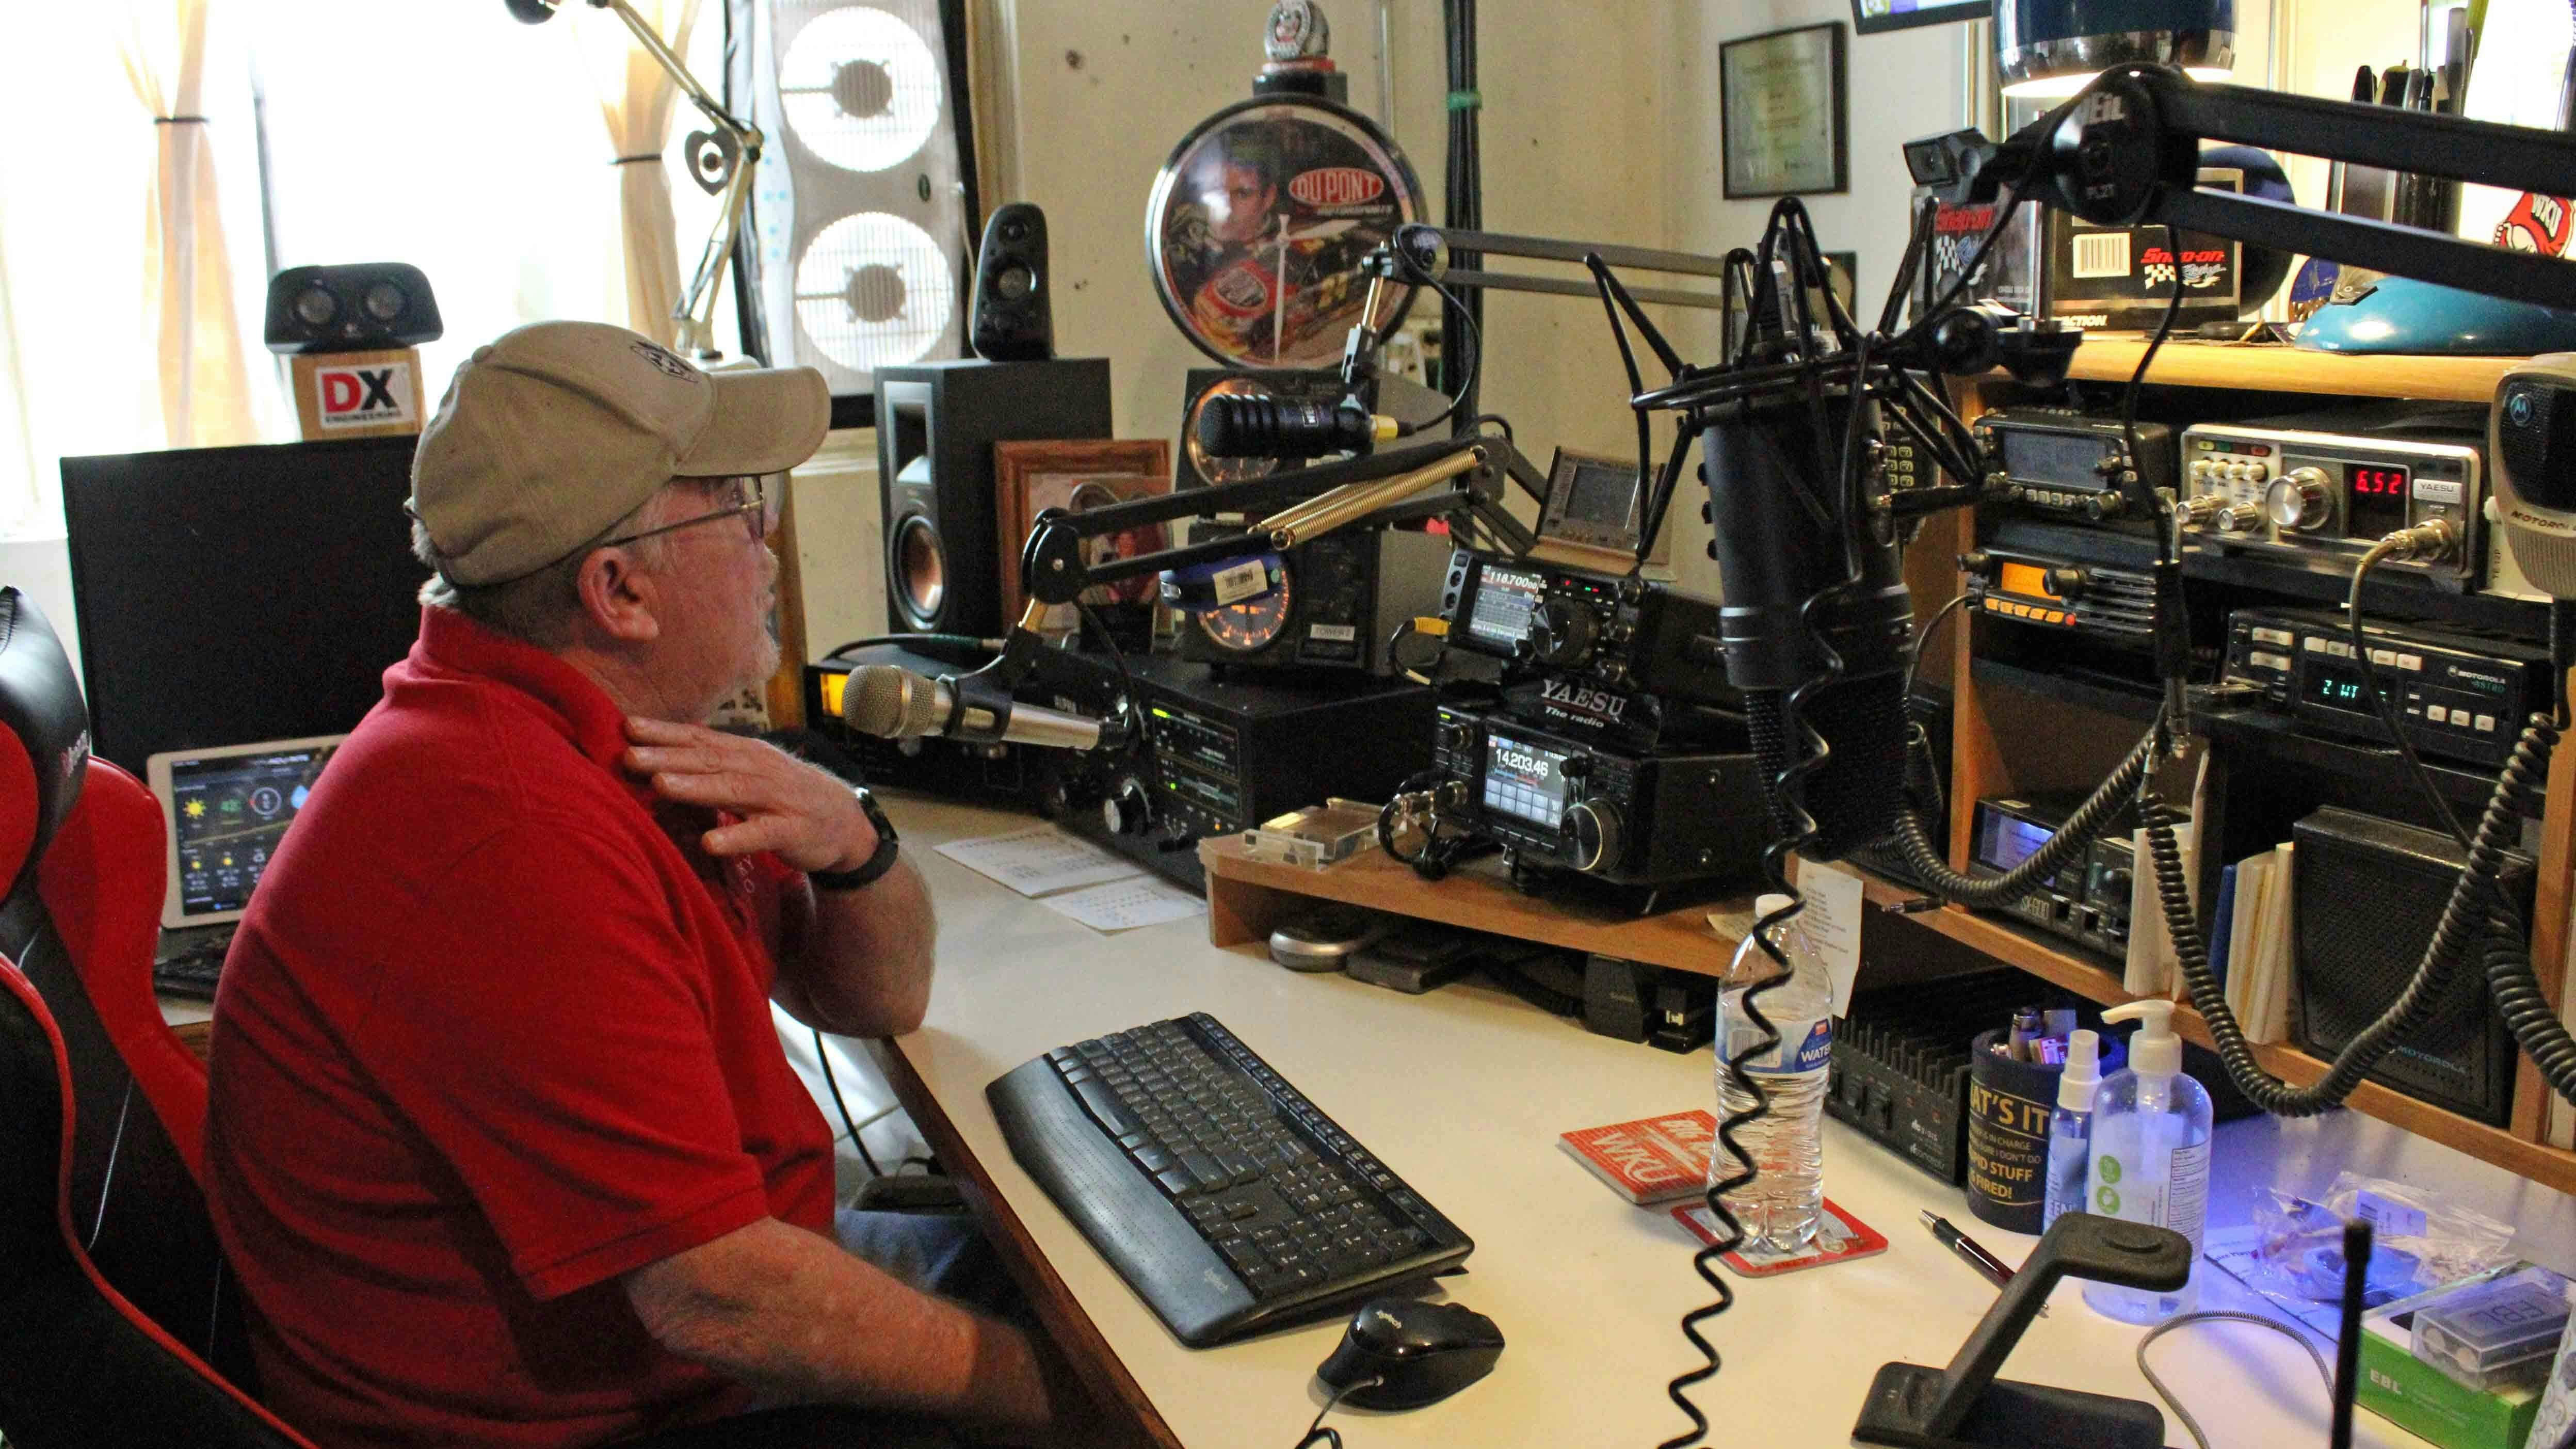 In The Age Of Social Media, Thousands Of Amateur (HAM) Radio Operators In Wyoming Still Use The Airwaves Your Wyoming News Source